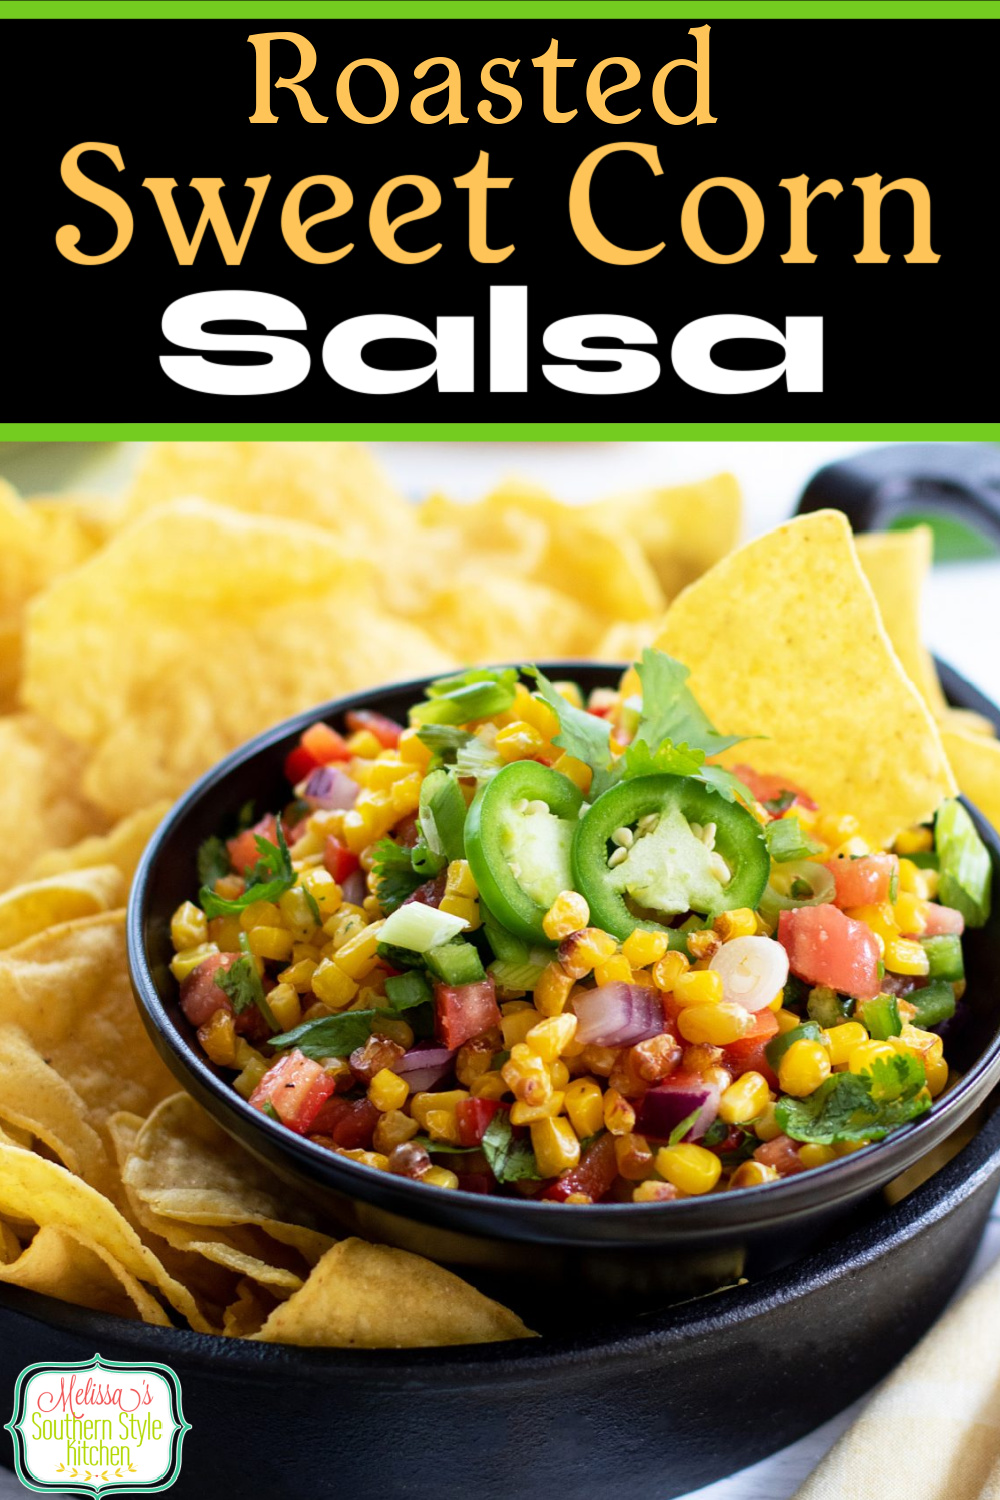 This Roasted Sweet Corn Salsa is packed with vibrant colors and flavors, too. #cornsalsa #easycornsalsa #cornrecipes #sweetcorn #roastedcorn #cornonthecob #condiments #appetizers #salsarecipe #salsa #mexicanfood via @melissasssk